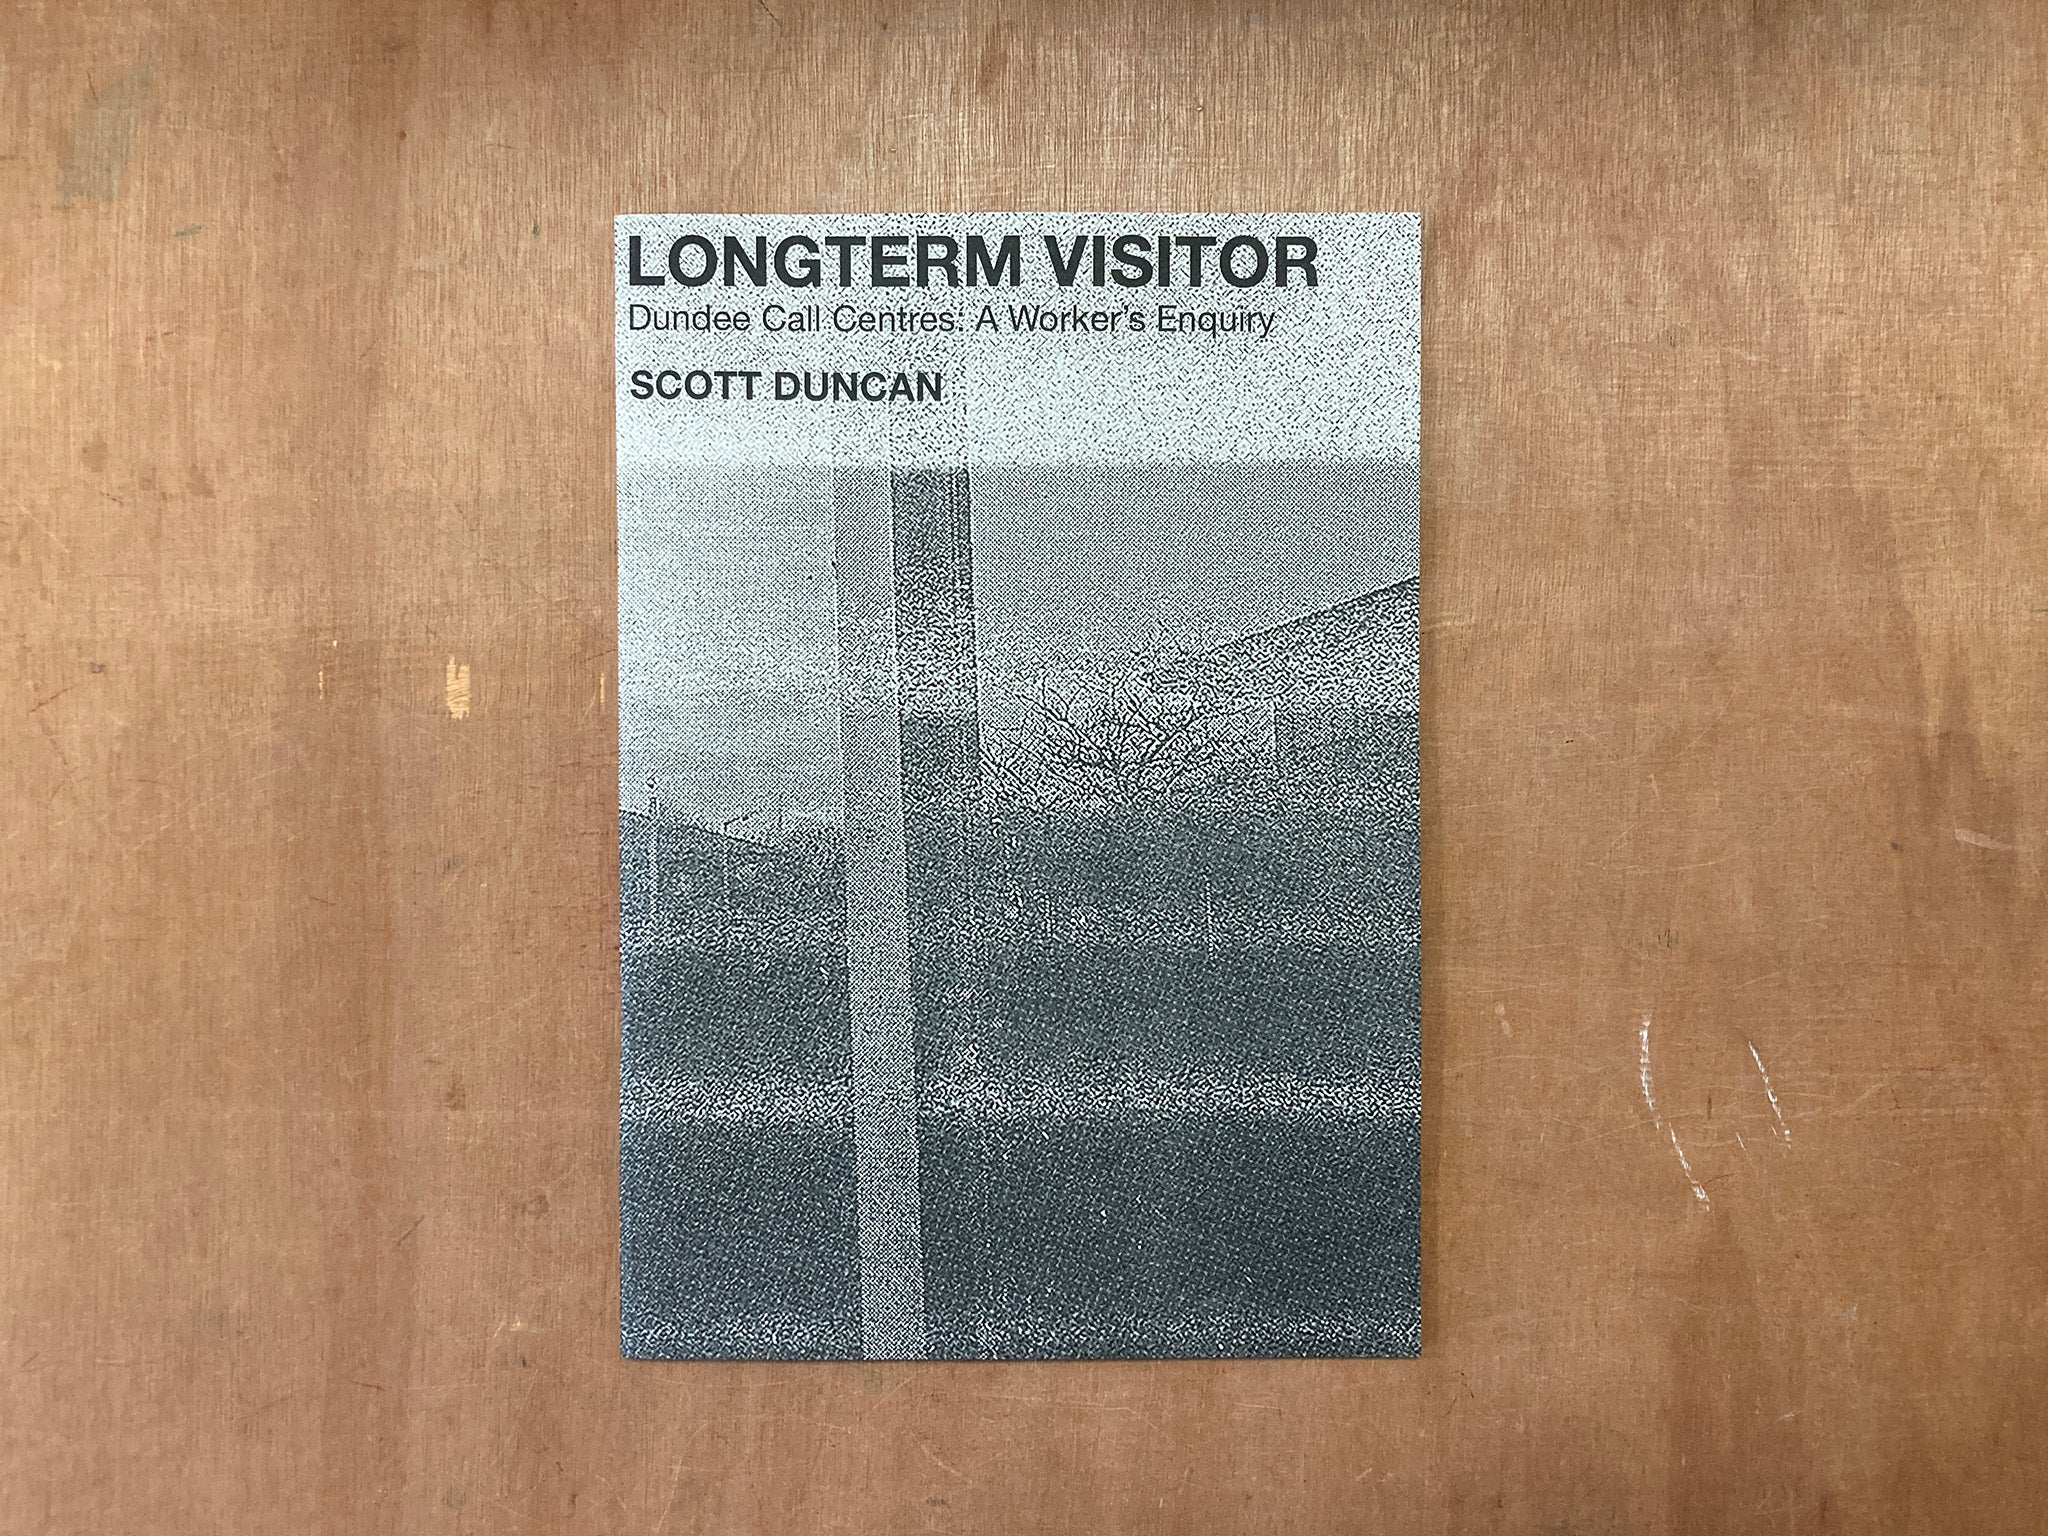 LONGTERM VISITOR by Scott Duncan